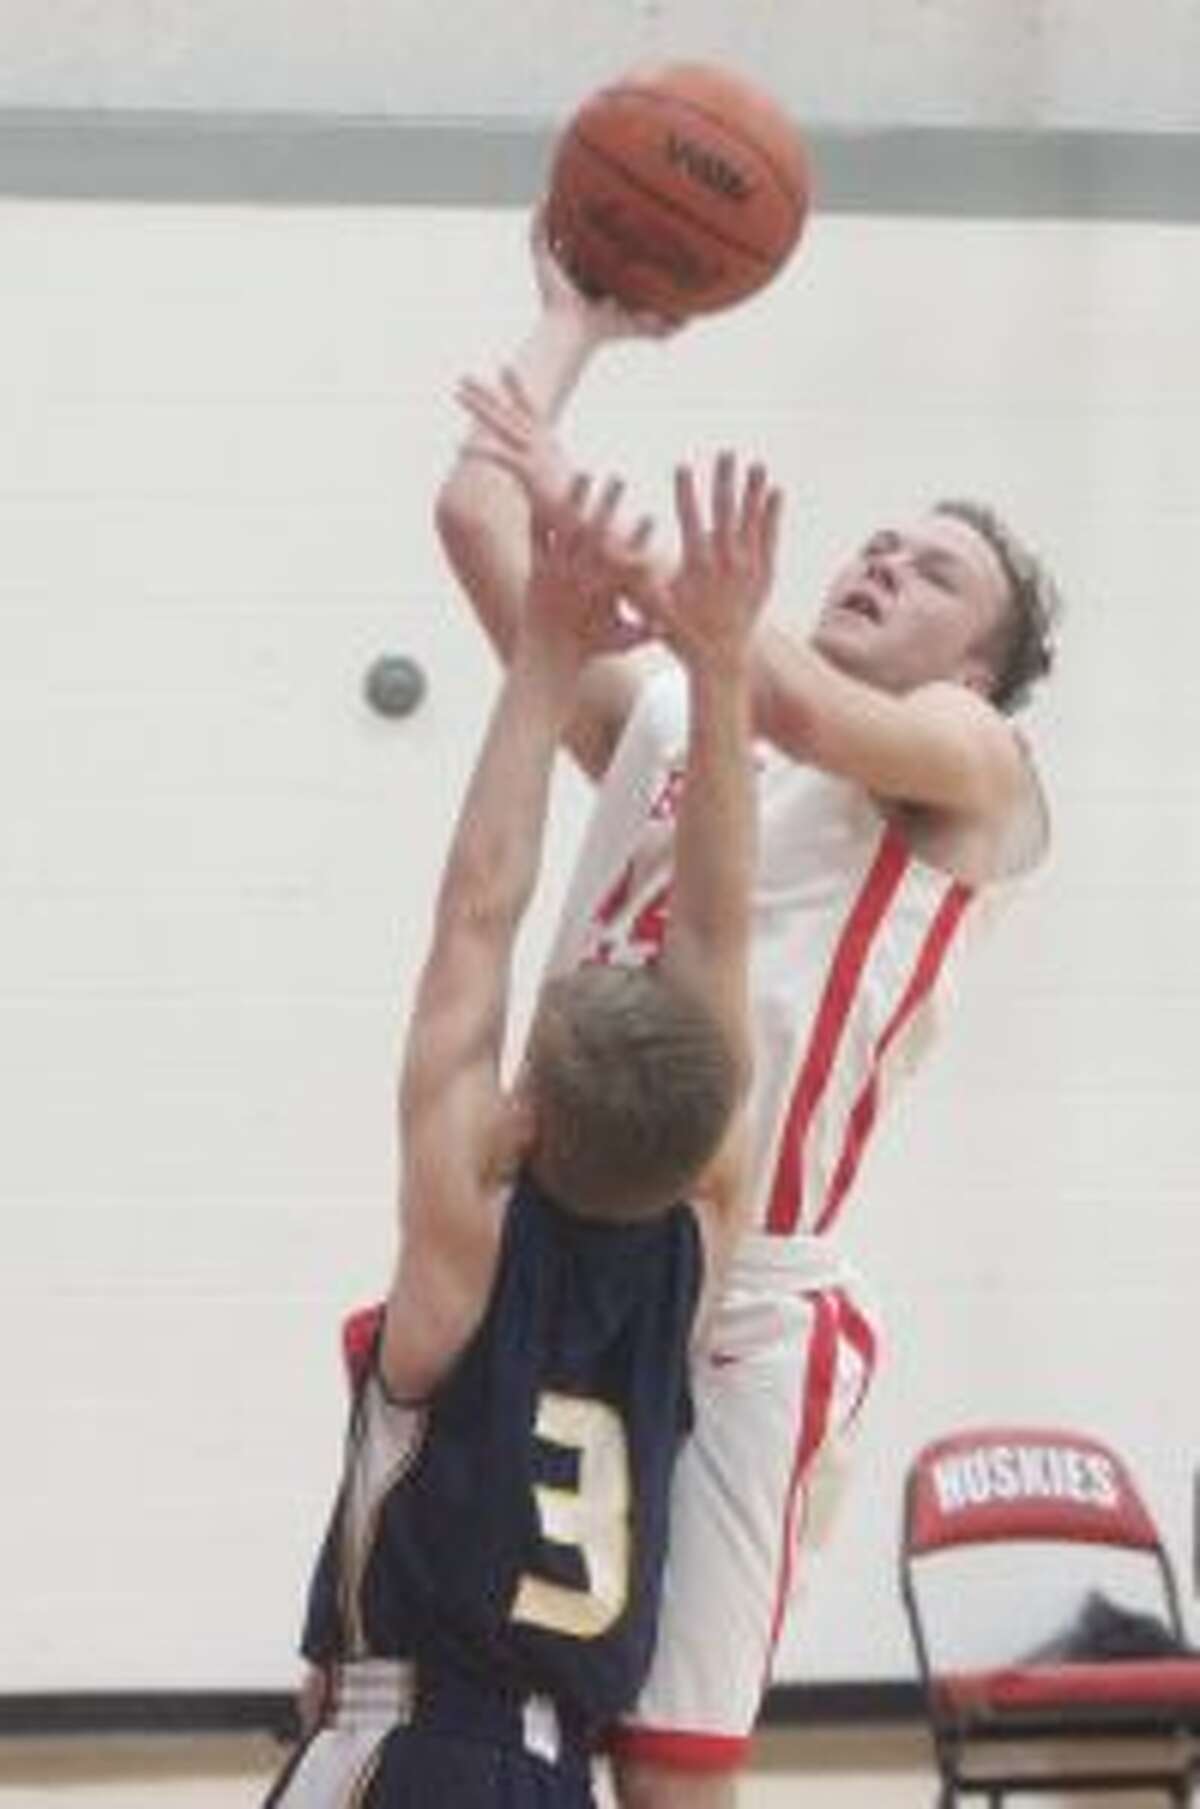 Chris Dunlop battles through contact for a layup during the Huskies JV loss to Cadillac. (Photo/Robert Myers)